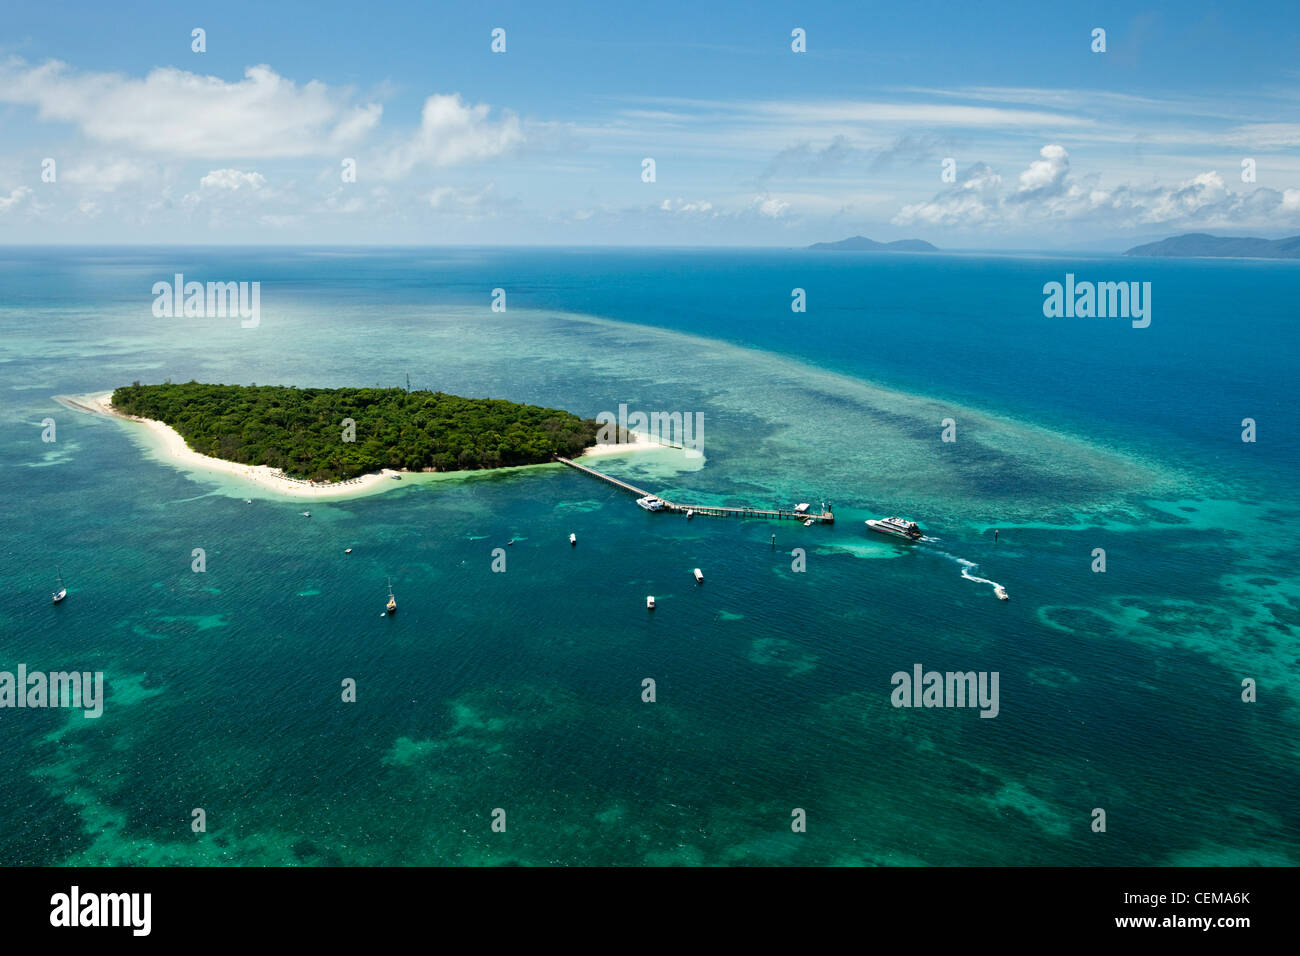 Aerial view of Green Island - a coral cay near Cairns. Great Barrier Reef Marine Park, Queensland, Australia Stock Photo